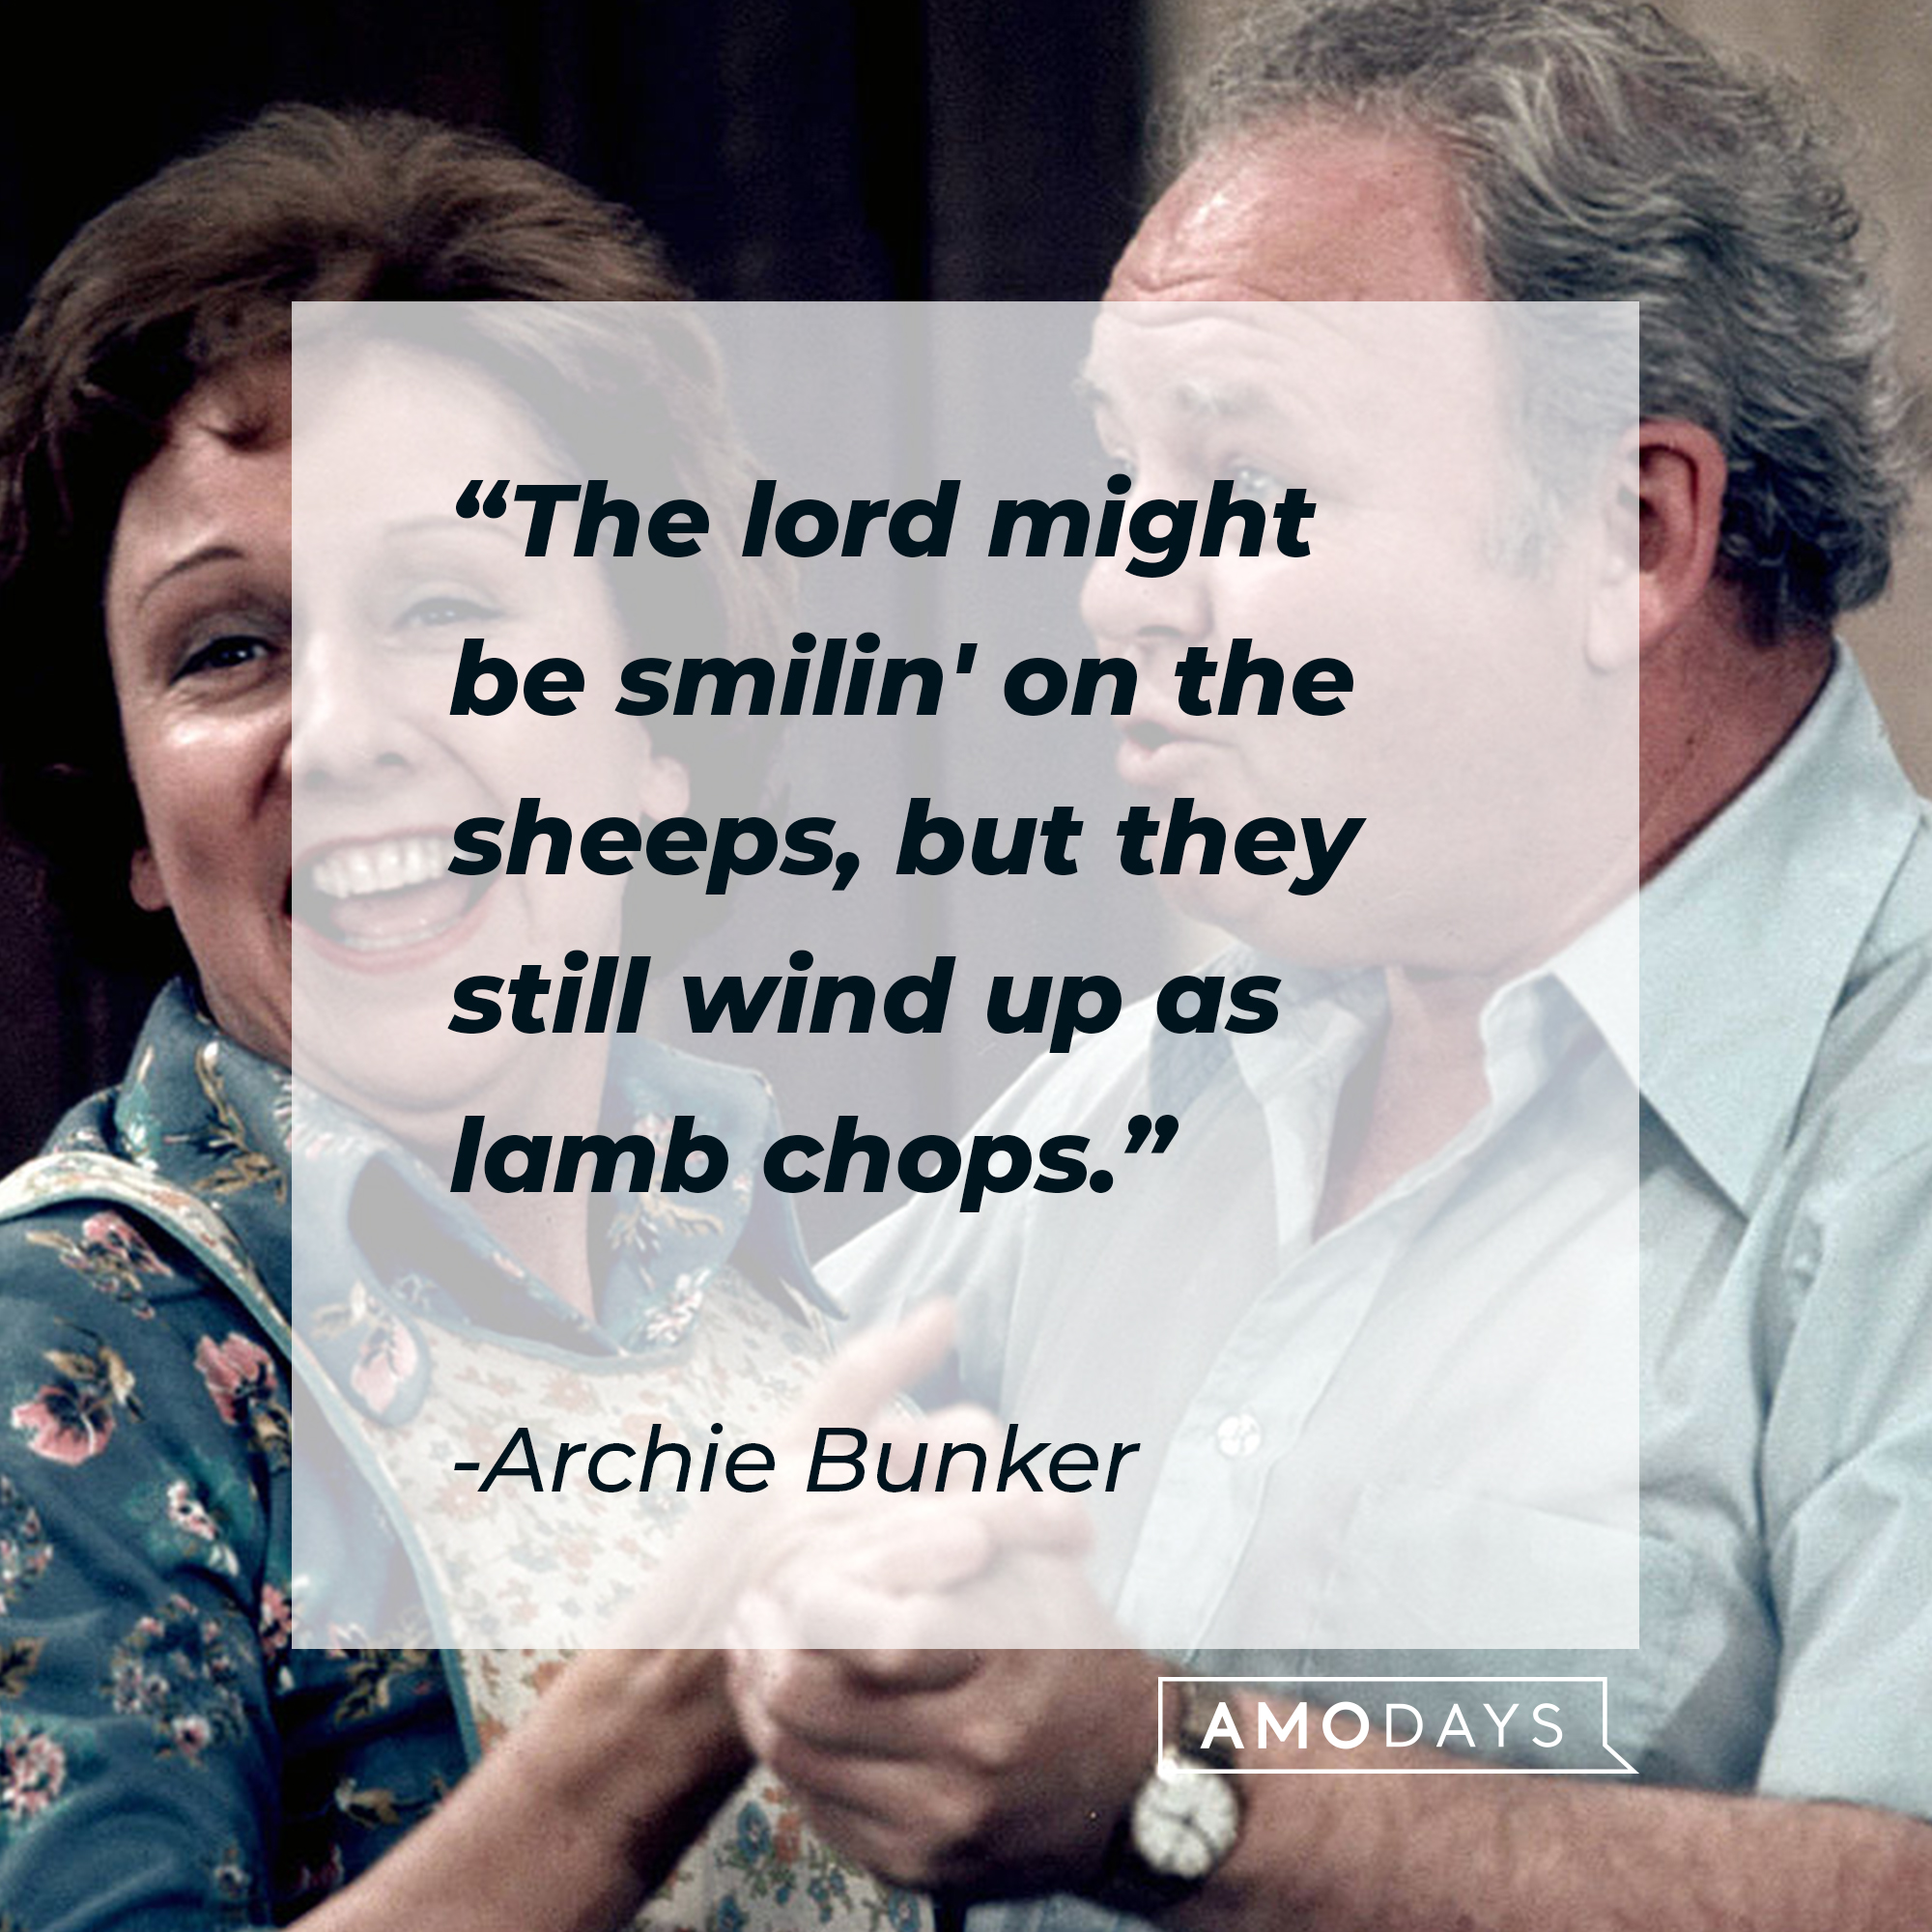 Archie Bunker's quote, "The lord might be smilin' on the sheeps, but they still wind up as lamb chops." | Source: Getty Images